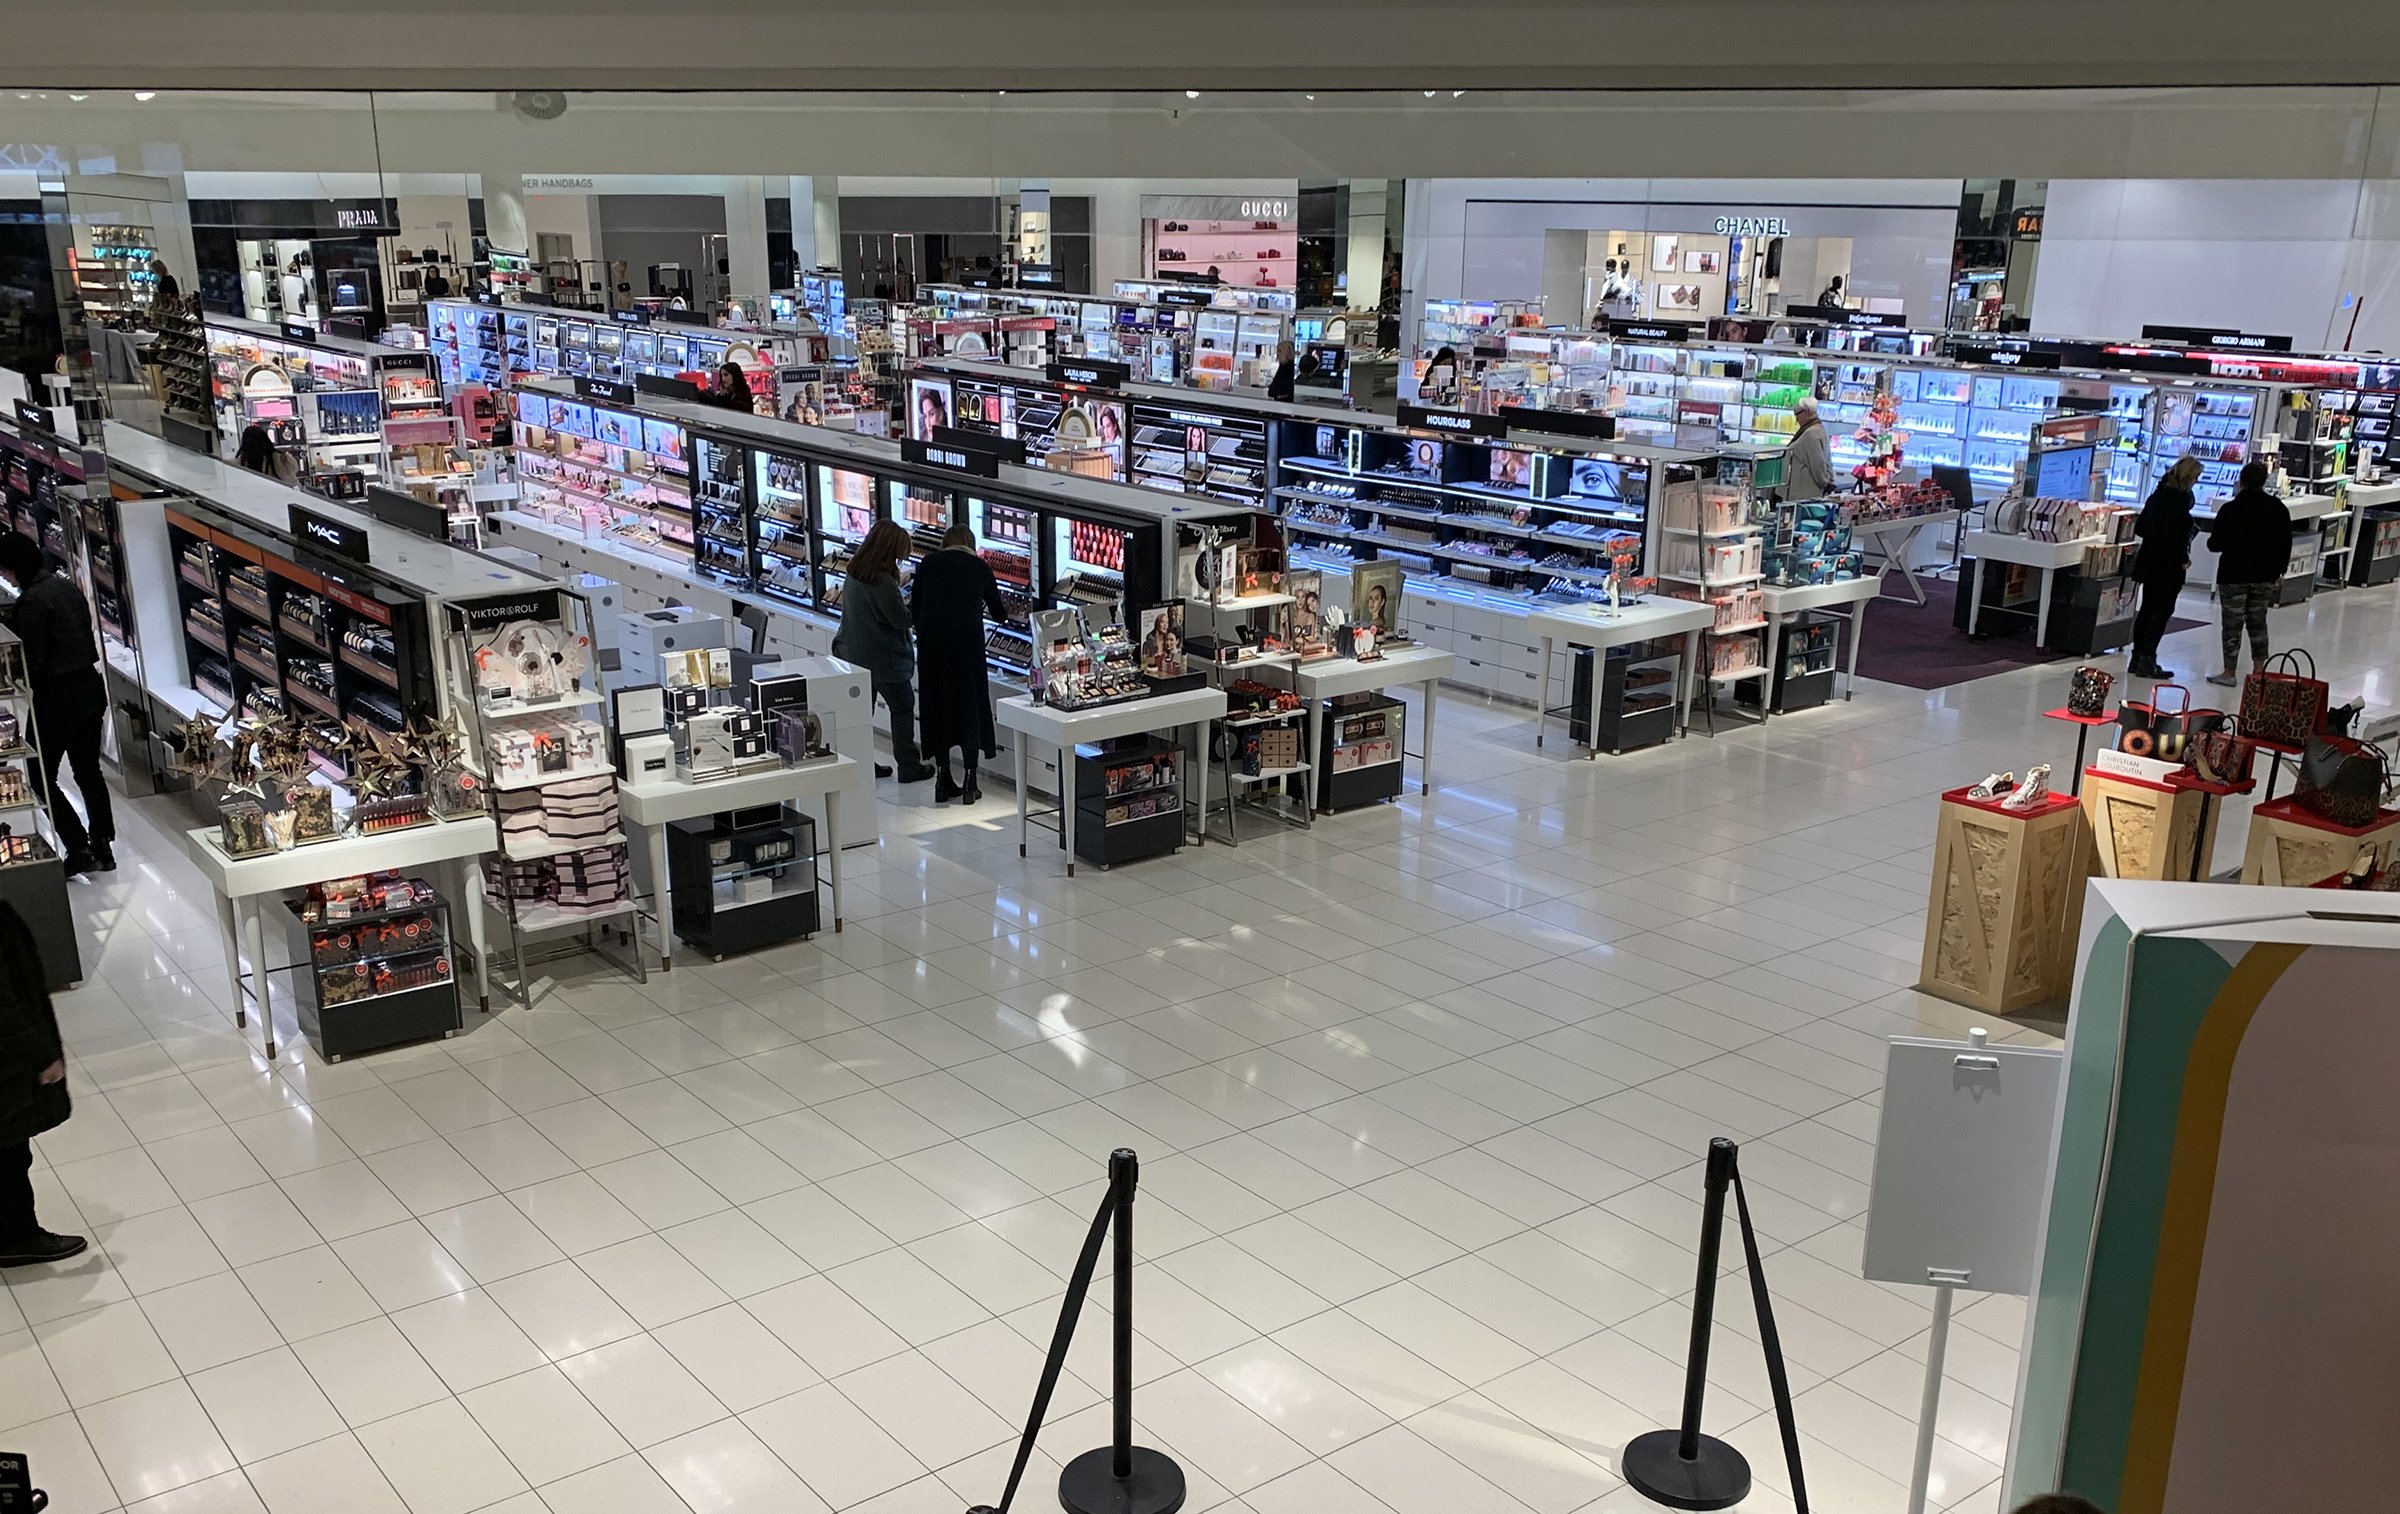 Nordstrom To Bring SPACE To New Markets